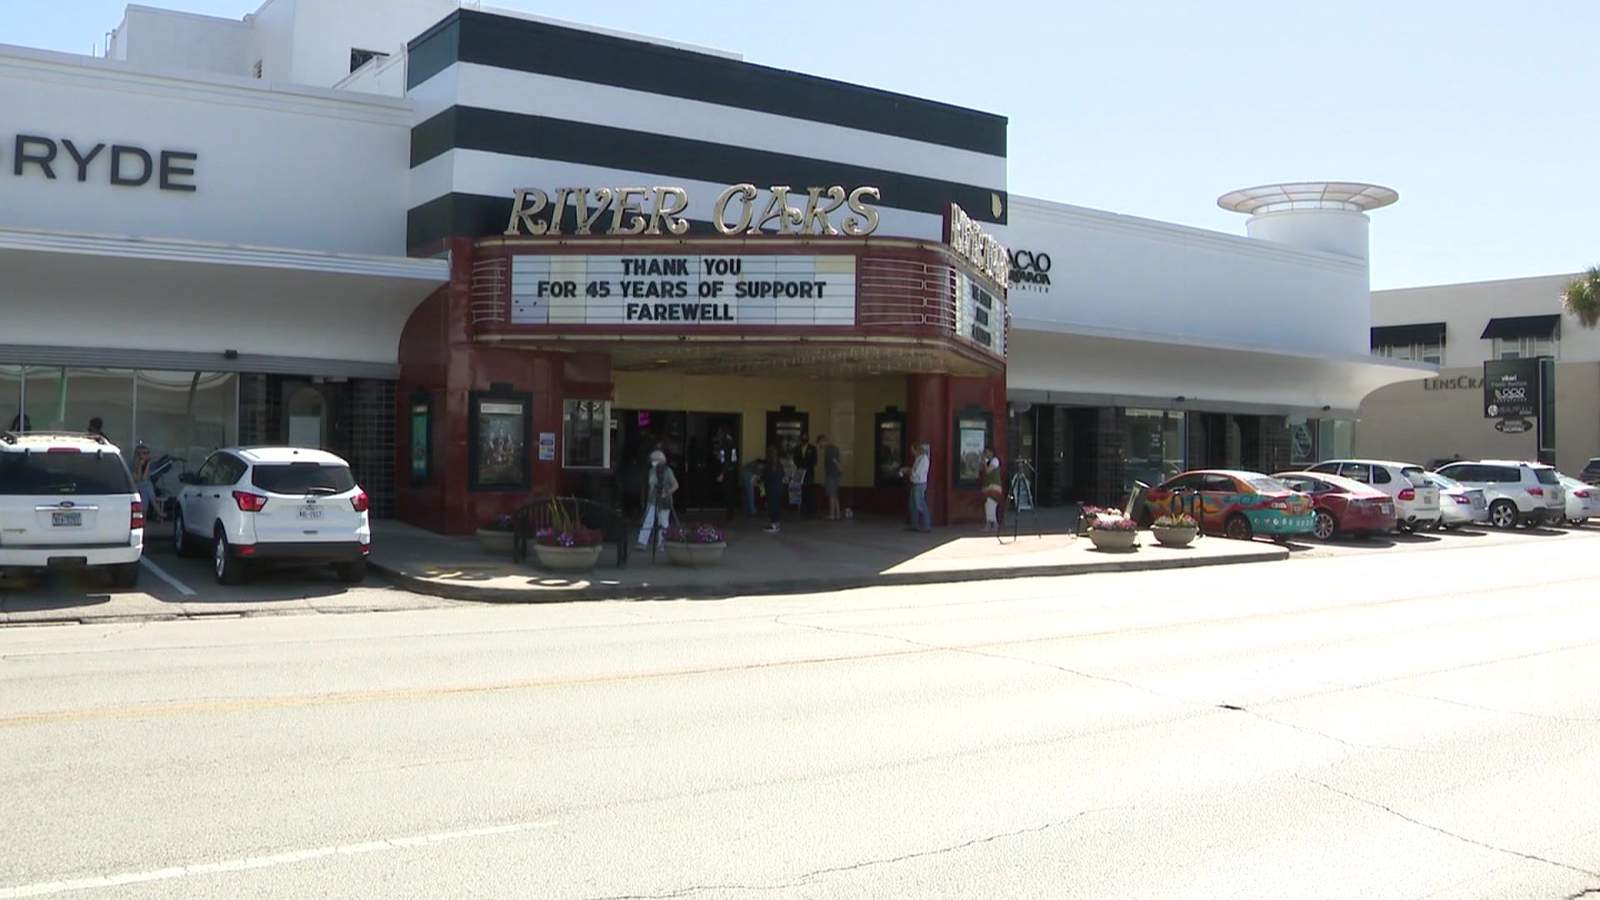 The final curtain: River Oaks Theatre to close indefinitely